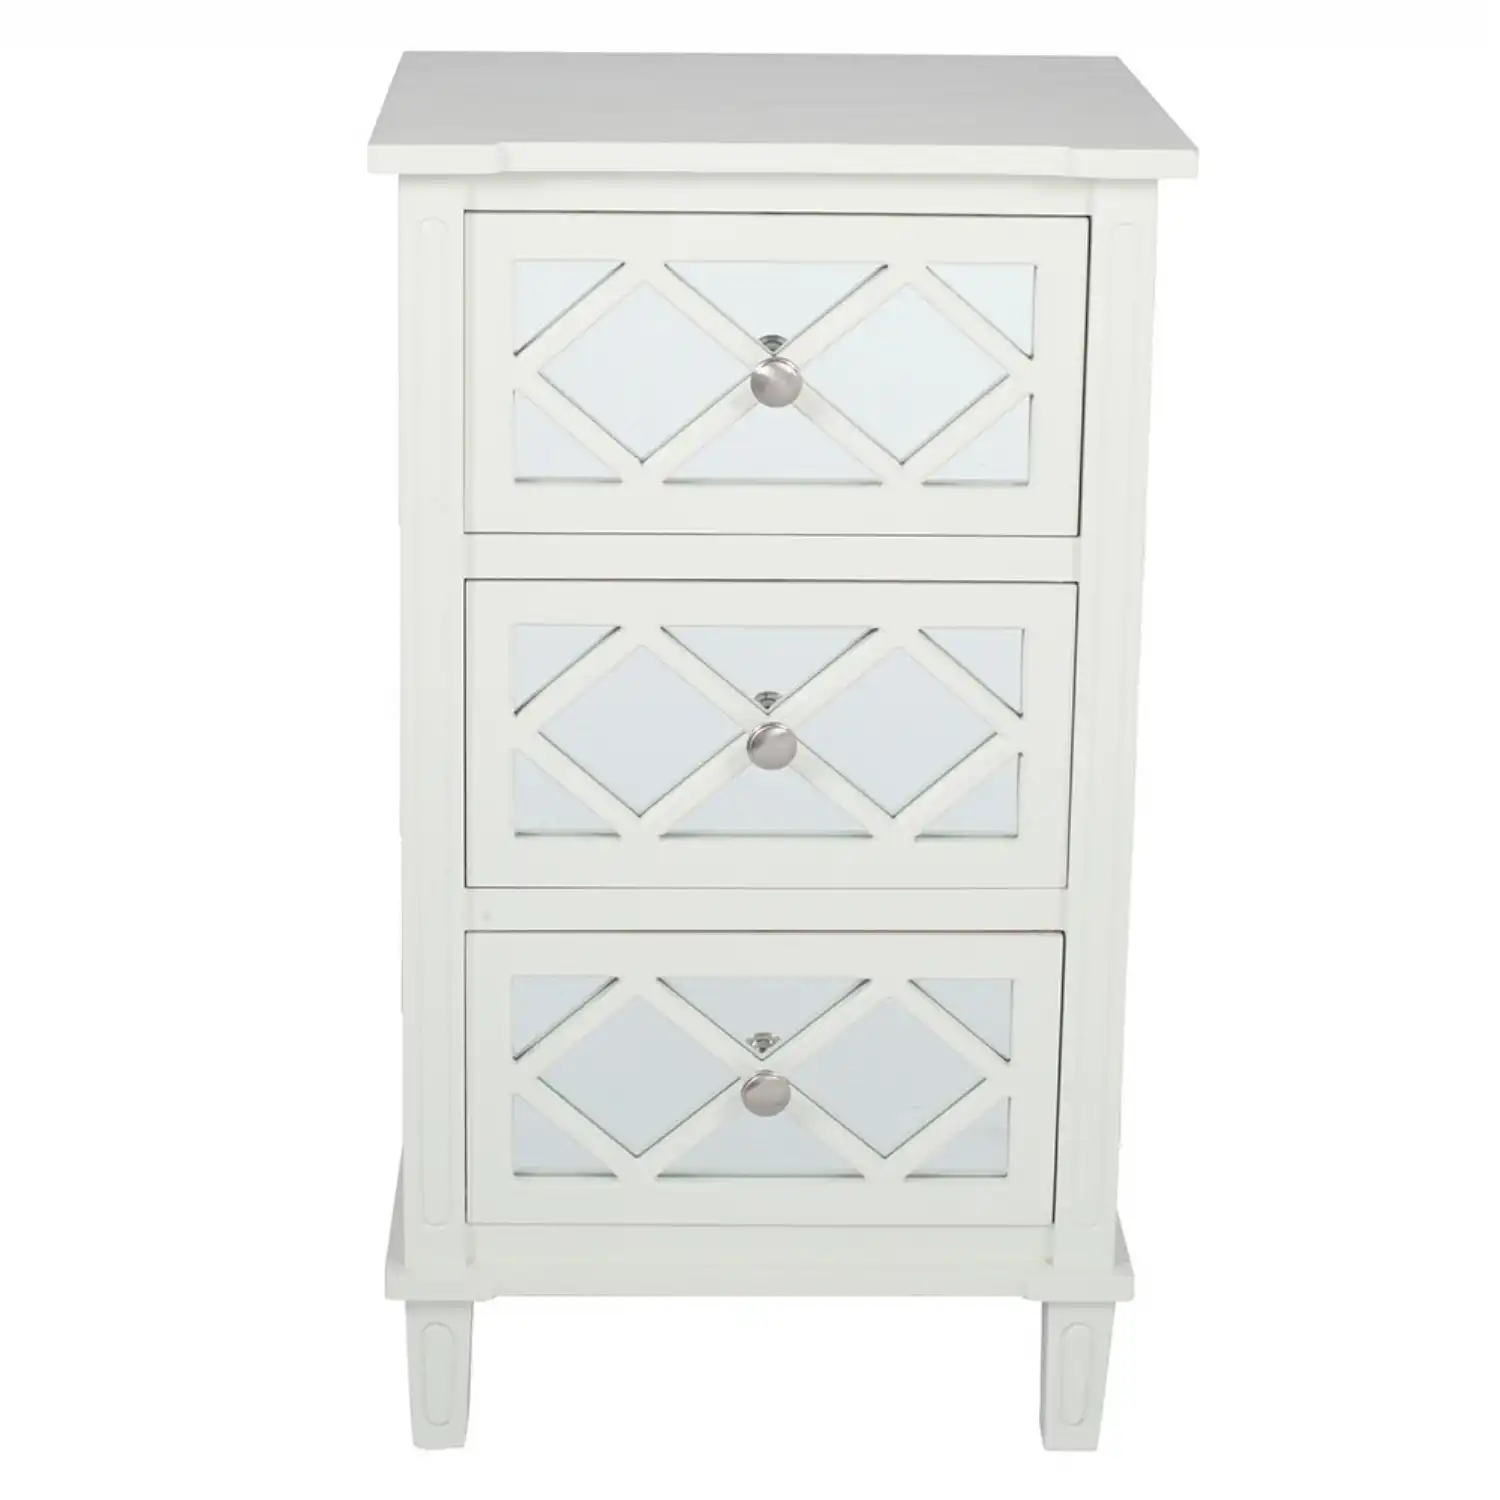 Ivory Mirrored Patterned 3 Drawer Bedside Chest